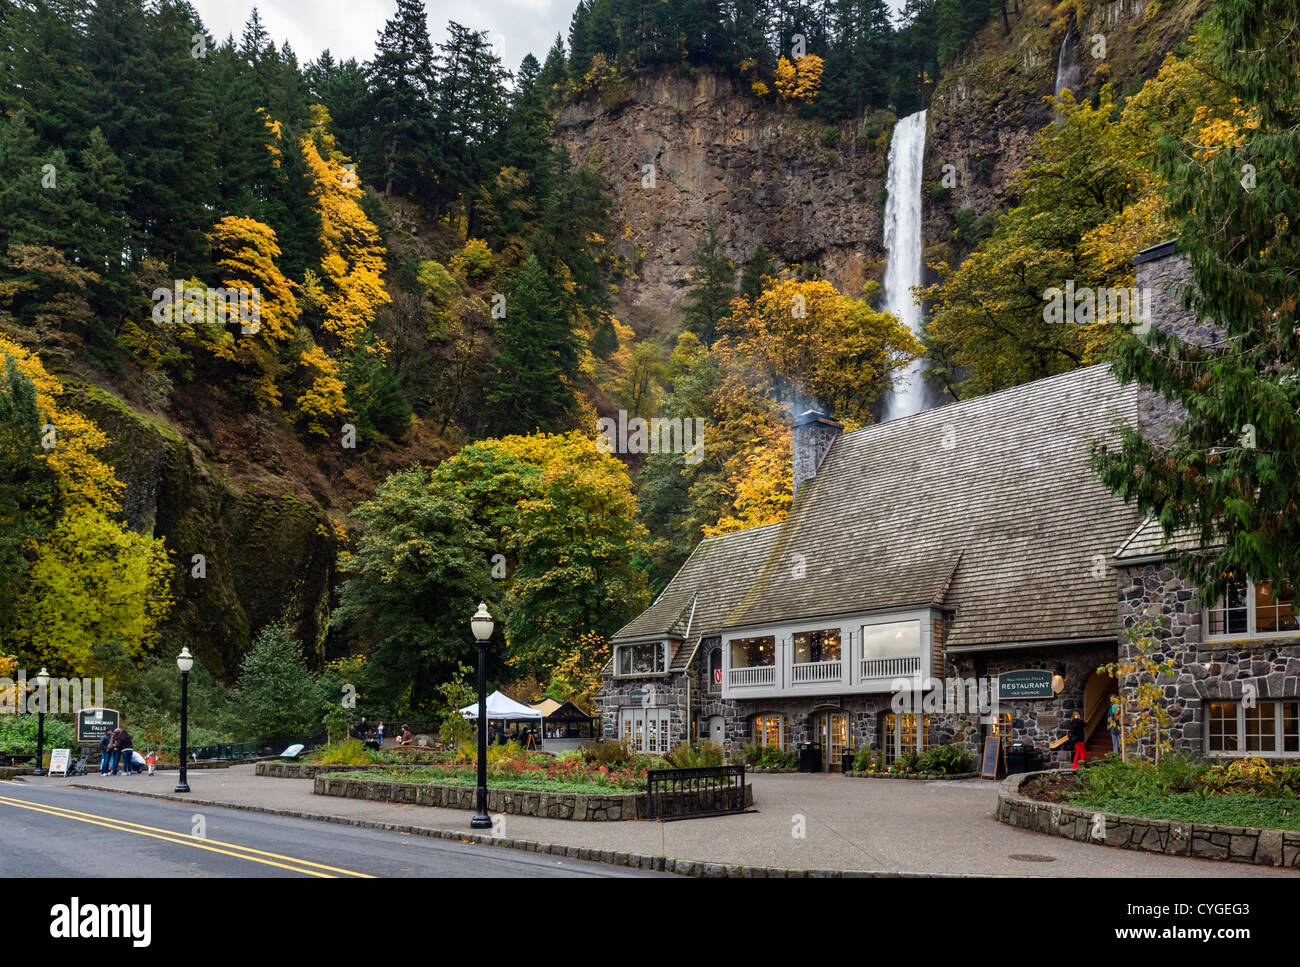 The Information Center, Gift Shop and Restaurant in front of Multnomah Falls, Columbia River Gorge, Oregon, USA Stock Photo